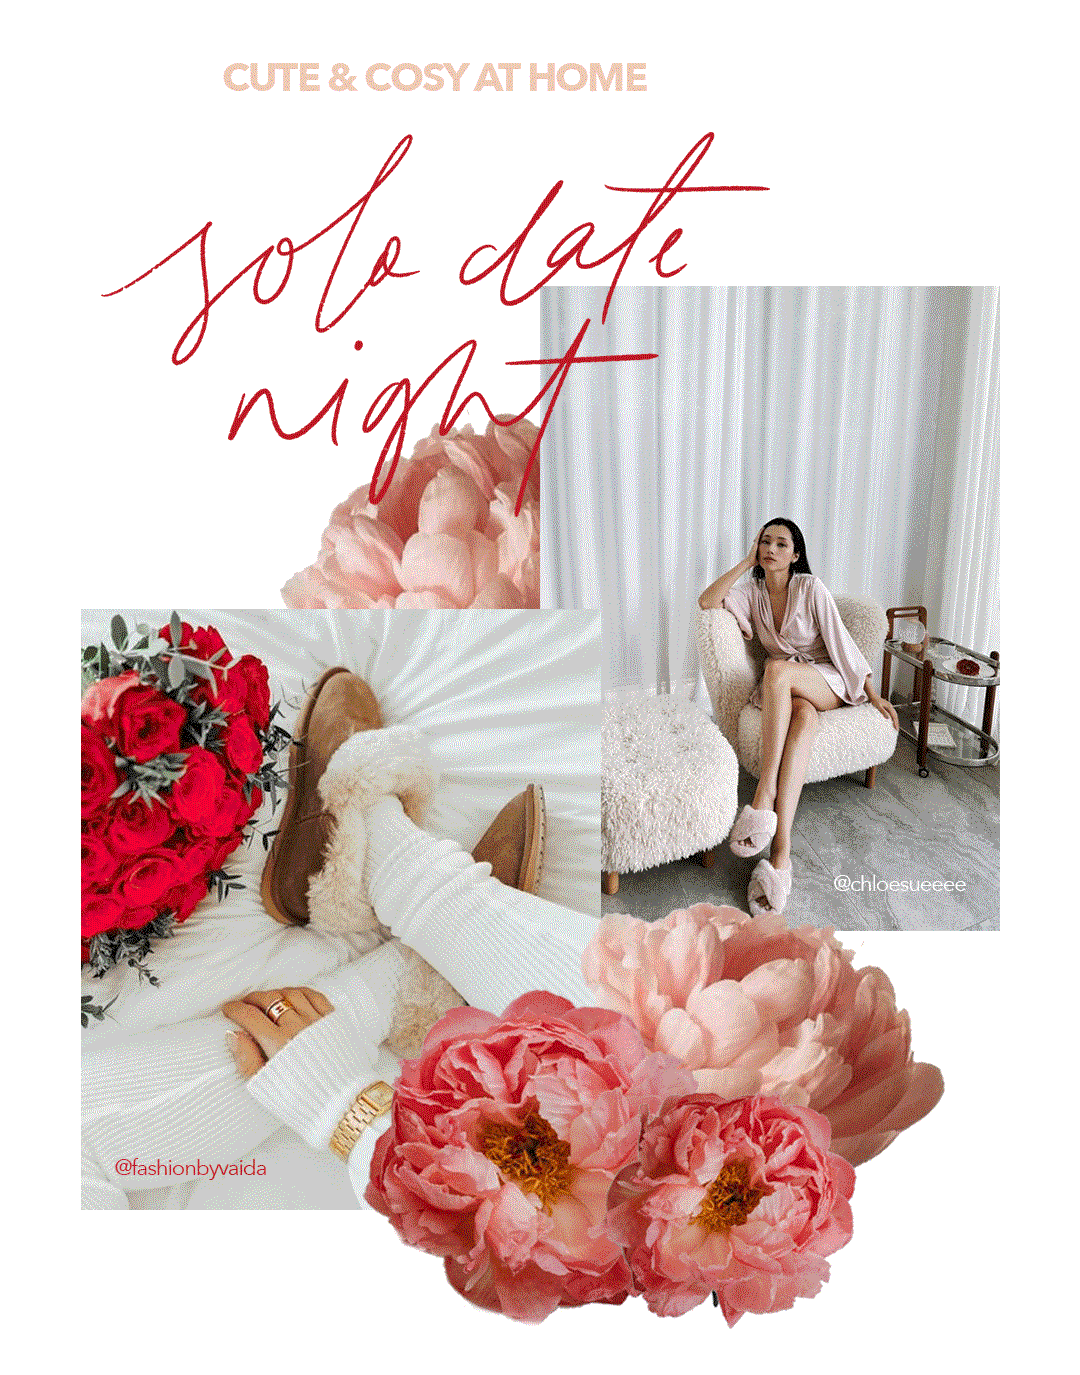 'Cute & Cosy at Home: Solo Date Night' women wearing cosy sheepskin slippers at home